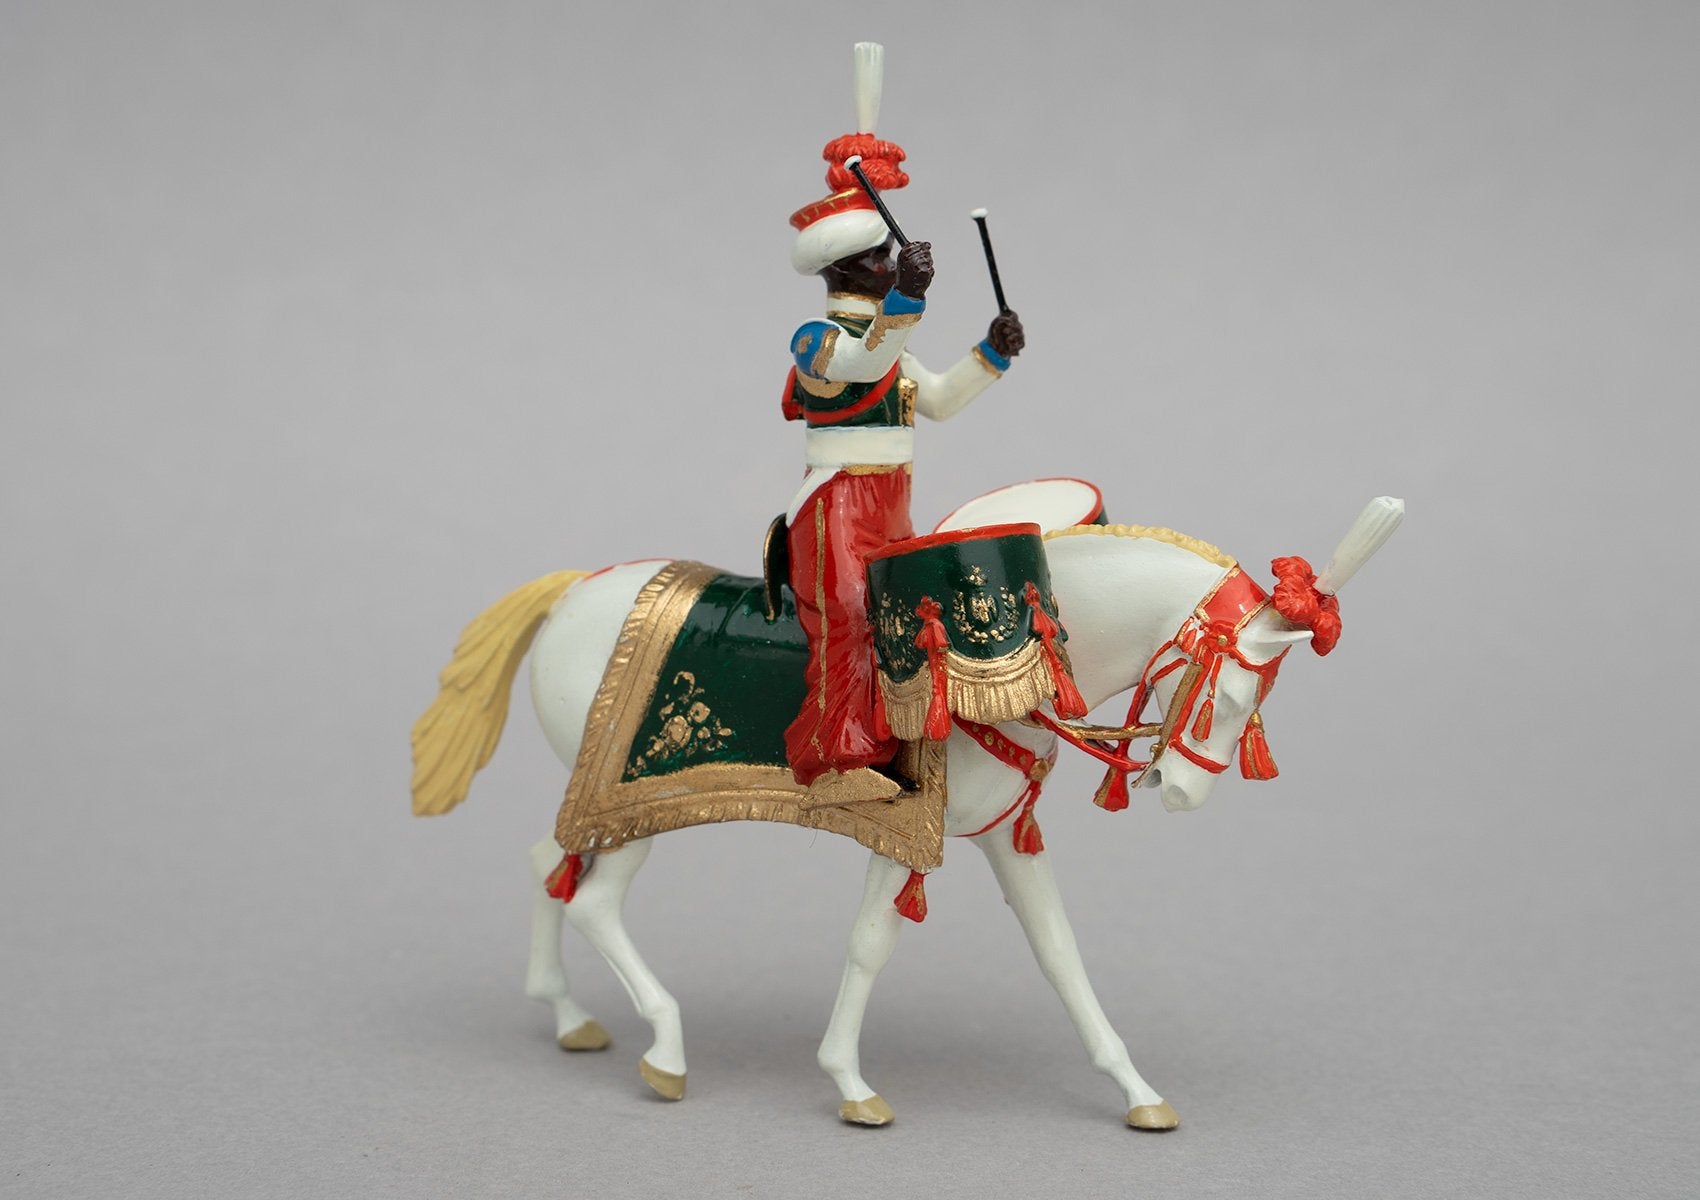 Set 120 Mameluke Drum Horse | French Cavalry | Napoleonic Wars | Drummer of Marmeluke cavalry. Uniform is of Syrian and Turkish Mameluke pattern; turban, sleeved chemise, arab sash, charoual-style trousers, and Mameluke sabre. Single mounted drummer on palomino | Waterloo | © Imperial Productions | Sculpt by David Cowe